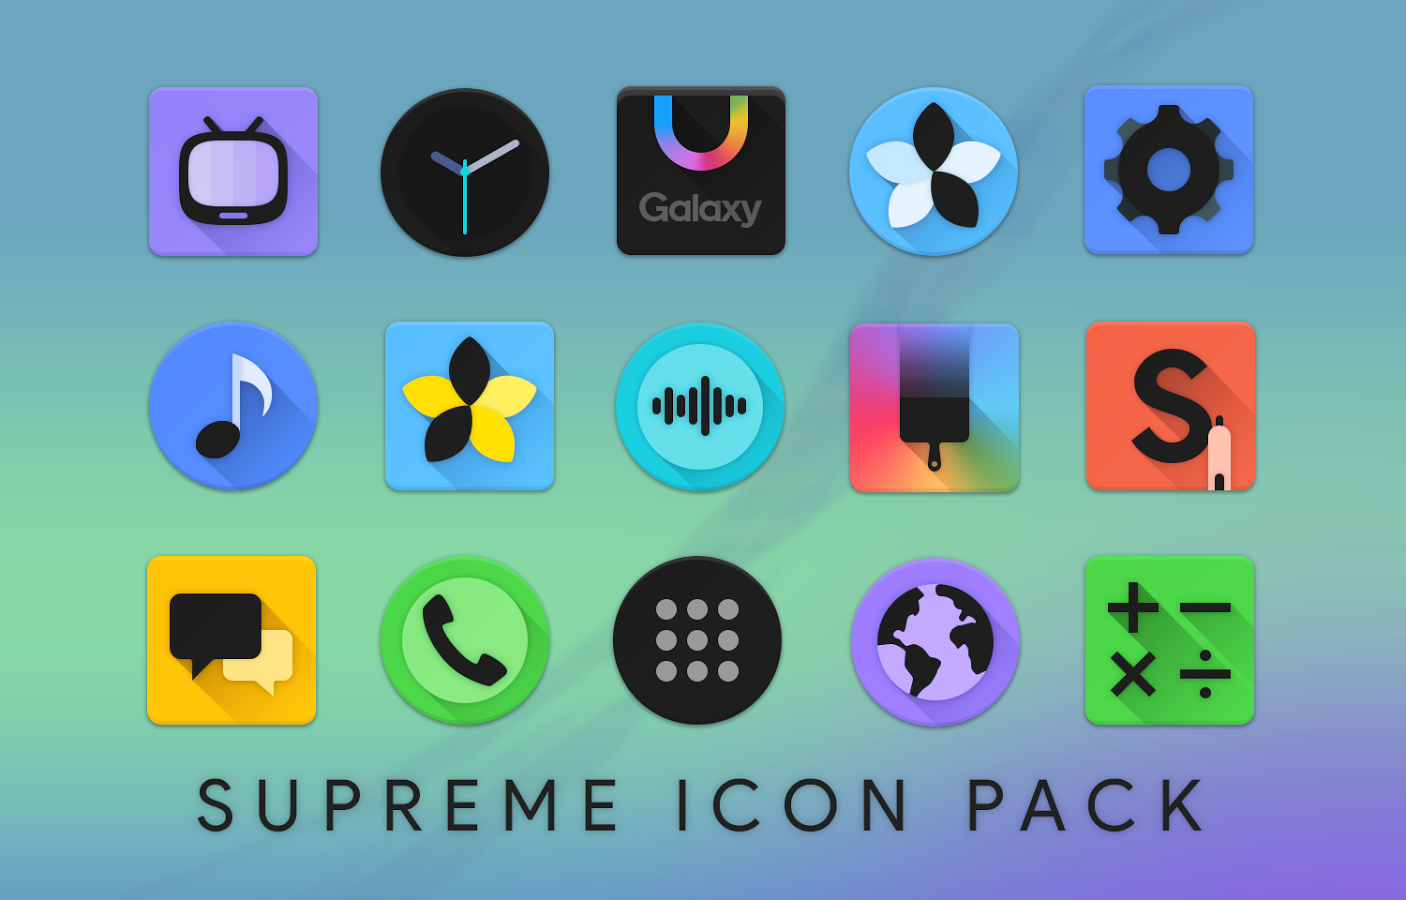 Supreme icon. Supreme icons. Icon Pack. Иконка замена цвета. Icon Pack material г.